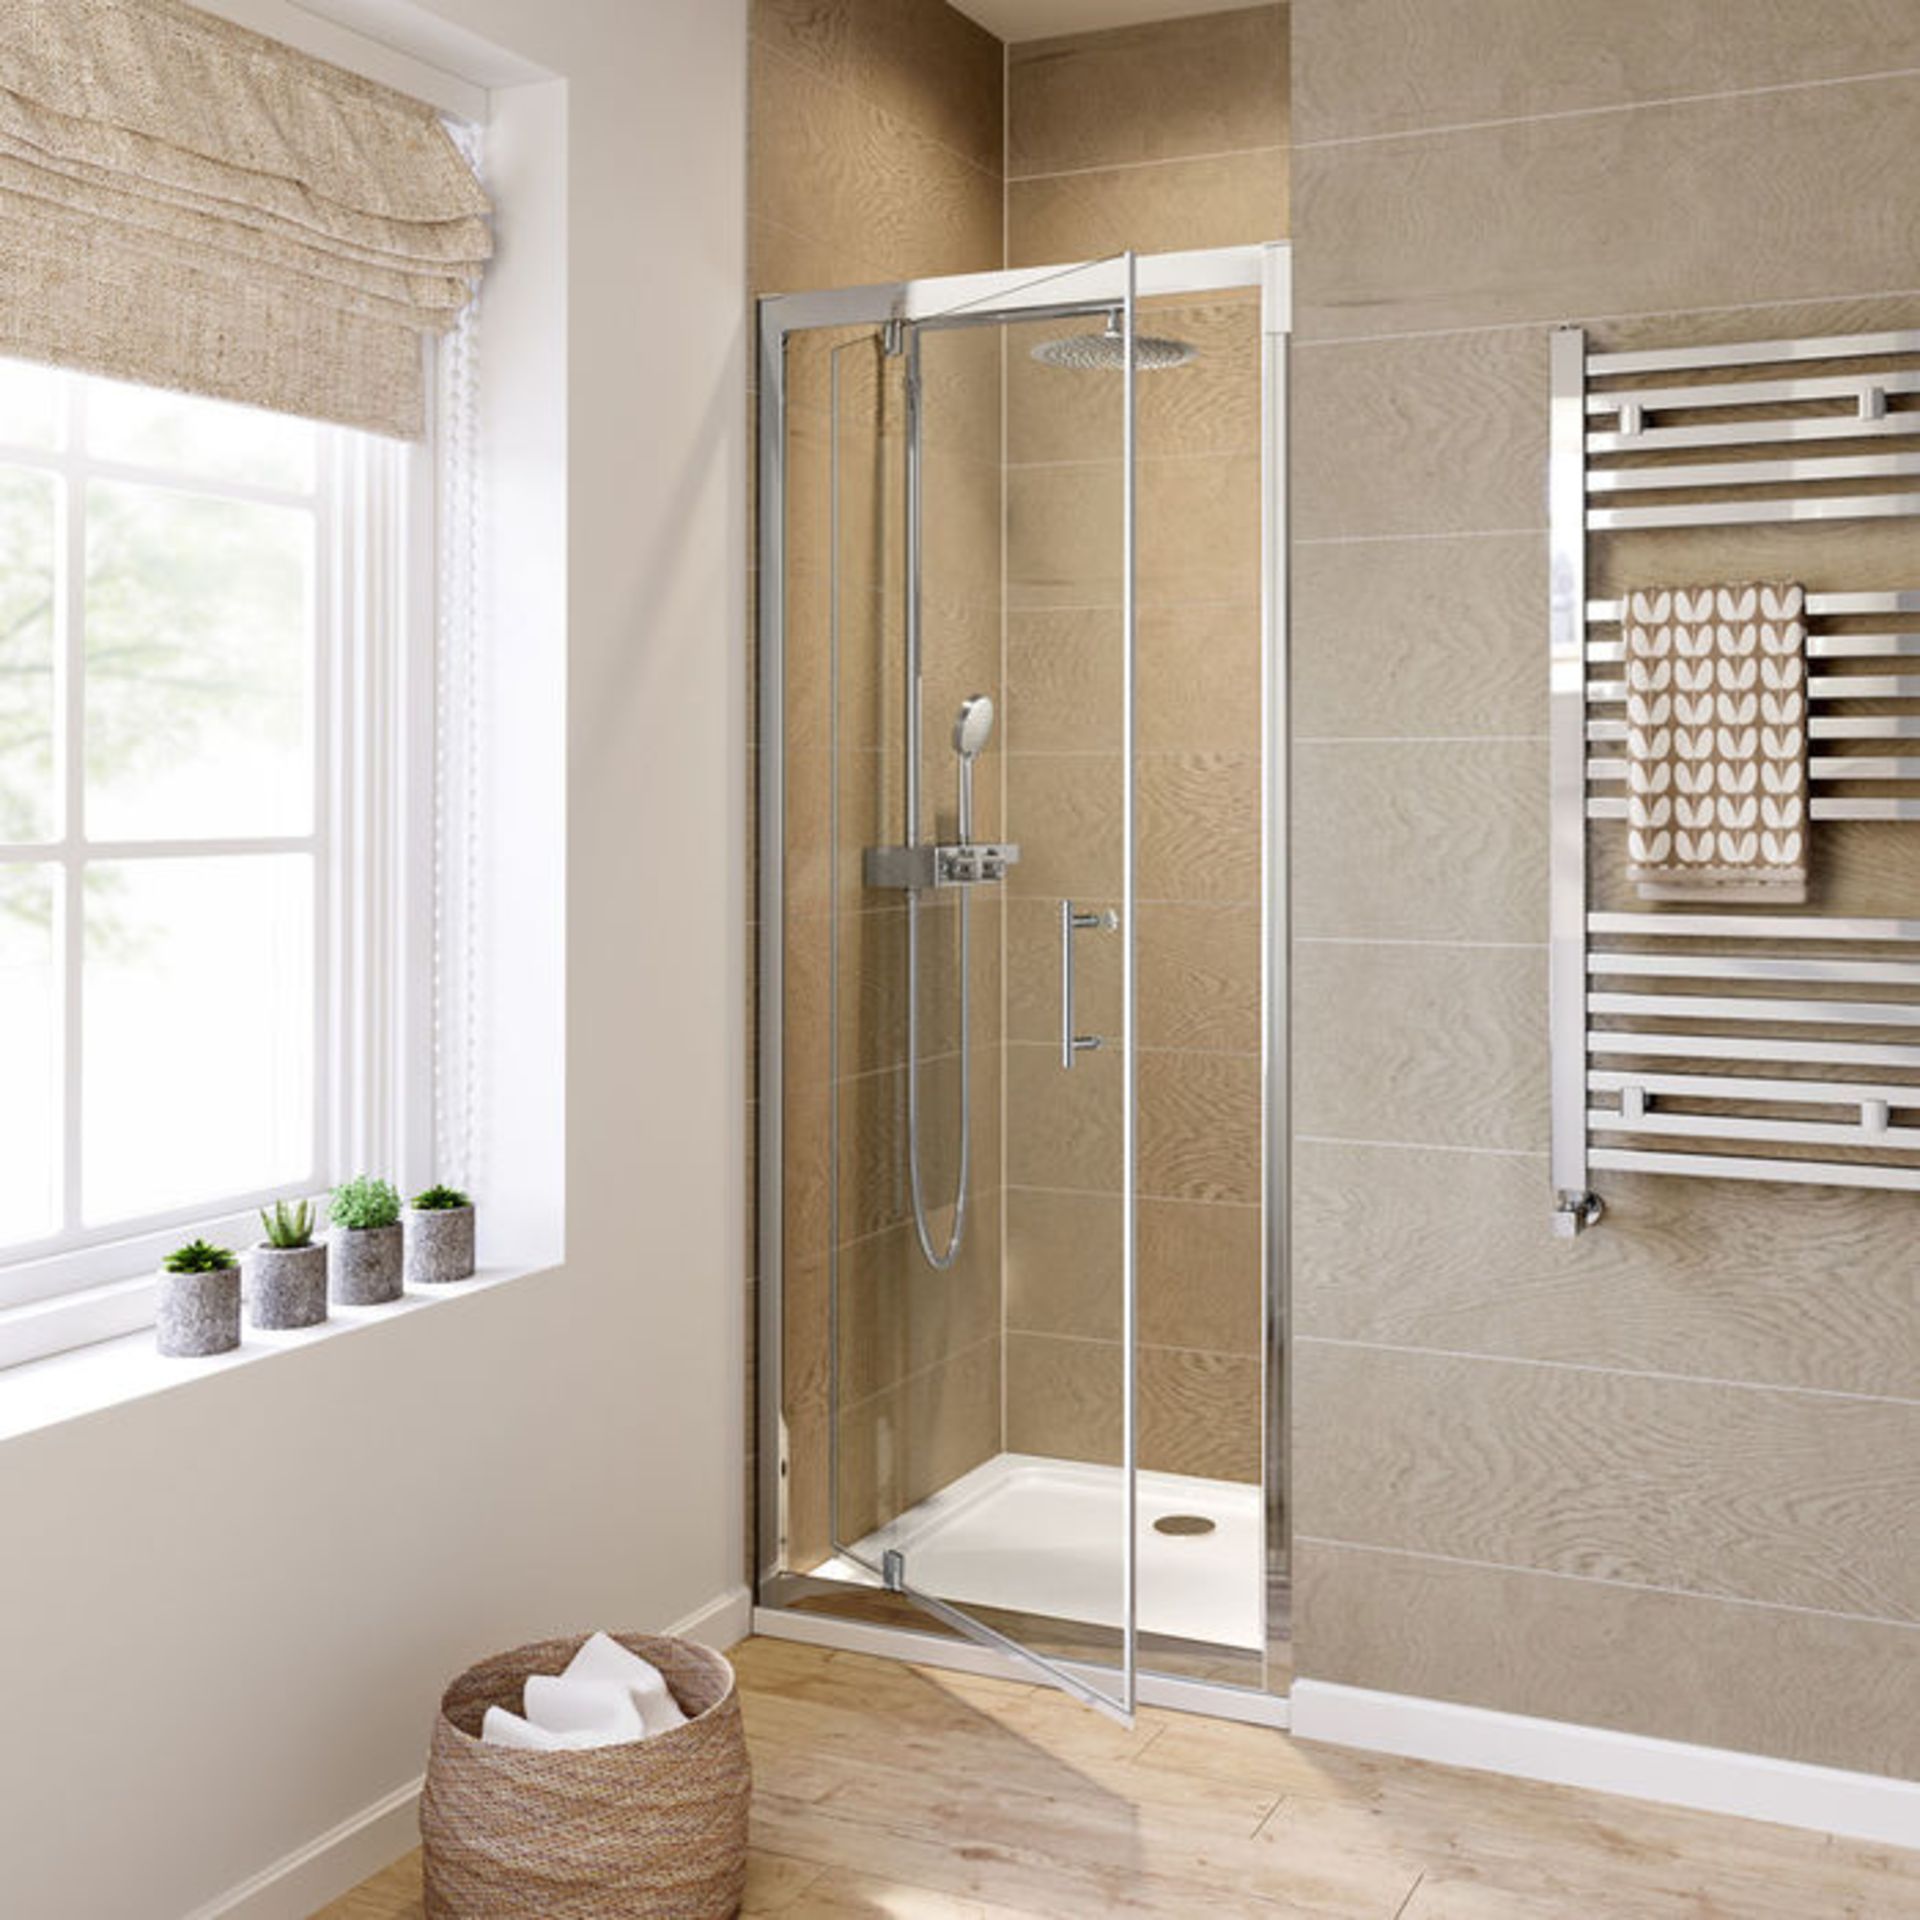 New (W50) 6mm - Elements Pivot 760mm Shower Door. 6mm Safety Glass Fully Waterproof Tested. ... - Image 3 of 3